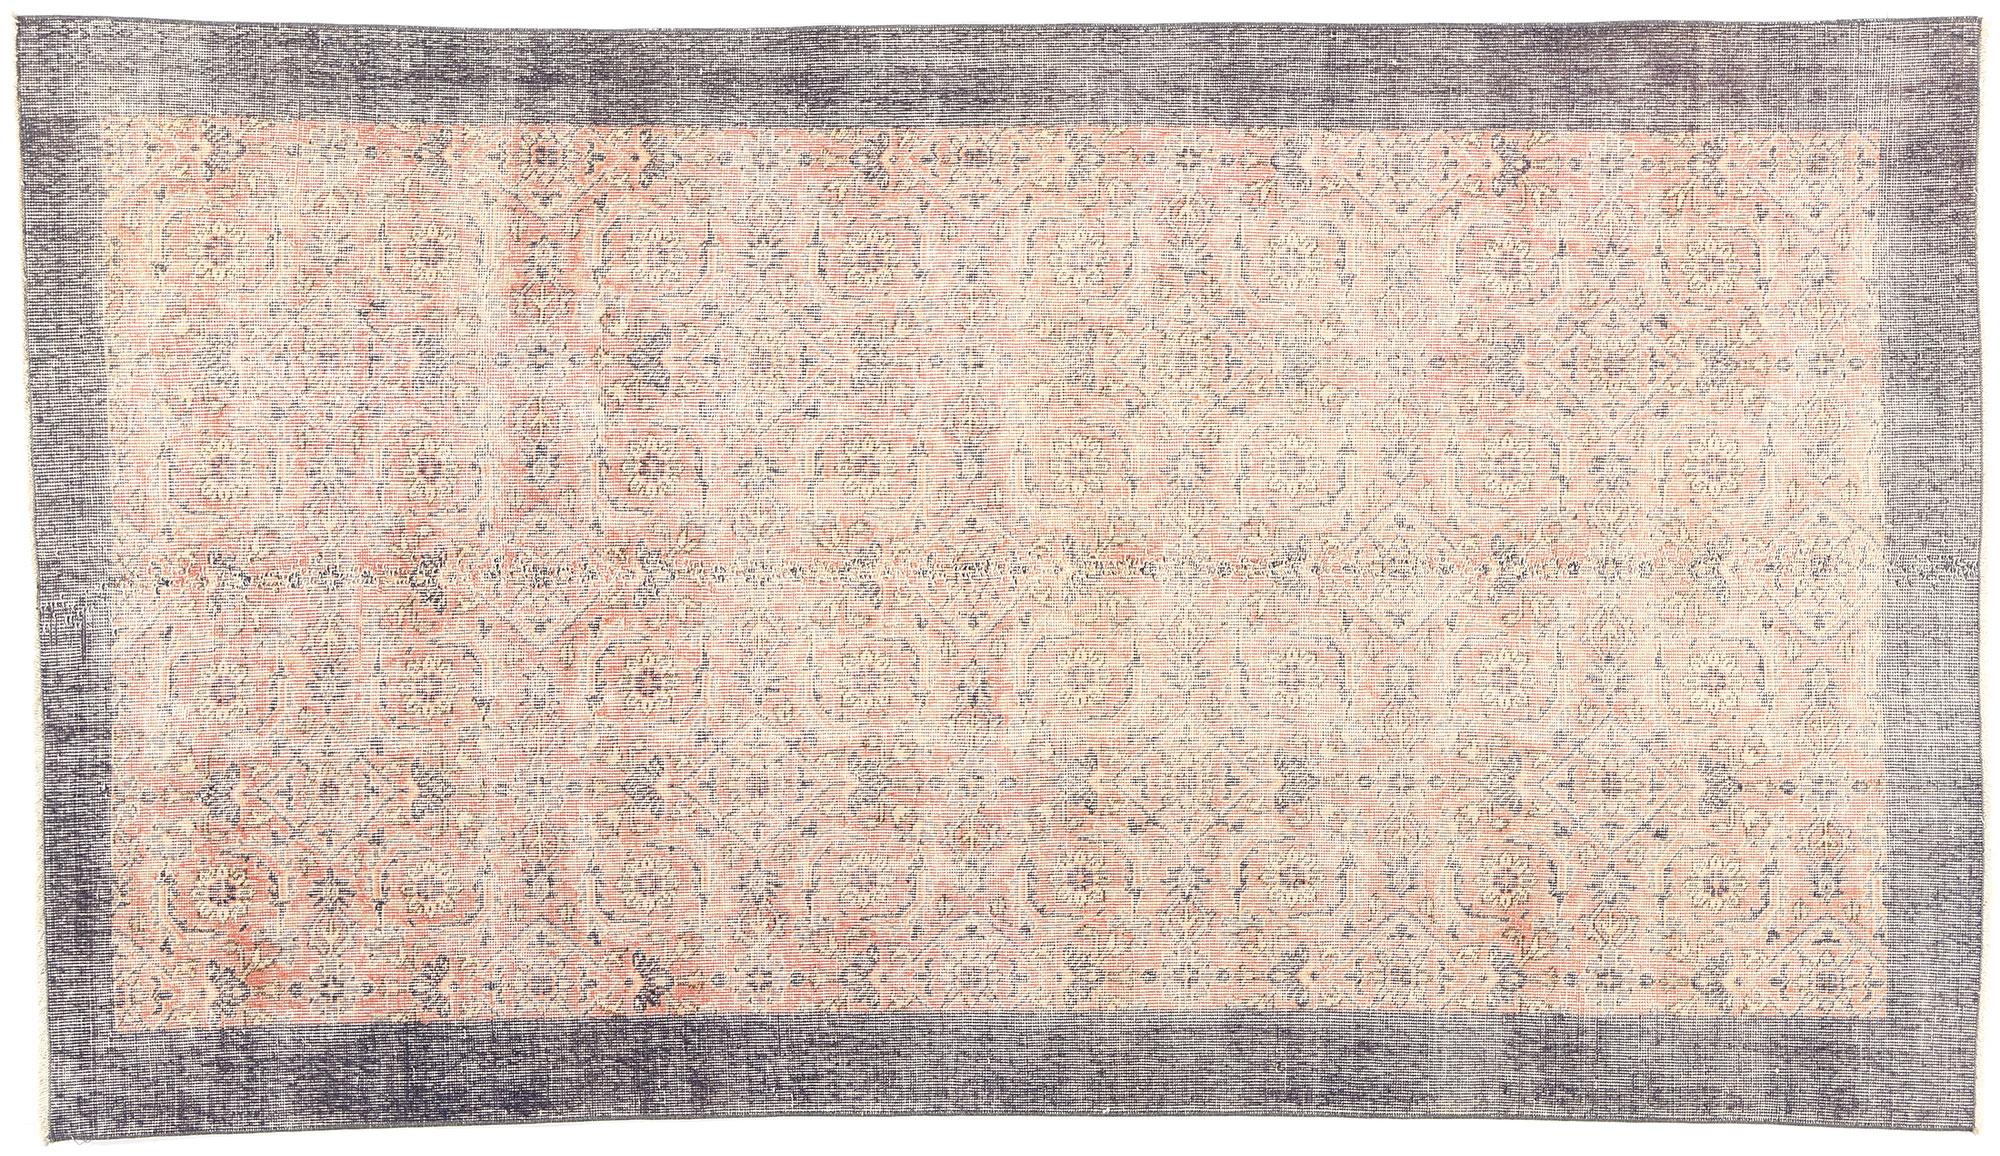 53821 Distressed Vintage Turkish Sivas Rug, 04'07 x 08'01. Distressed Turkish Sivas rugs are traditional rugs originating from Sivas in central Anatolia, Turkey, feature faded colors, frayed edges, and worn-in patterns, crafted from high-quality